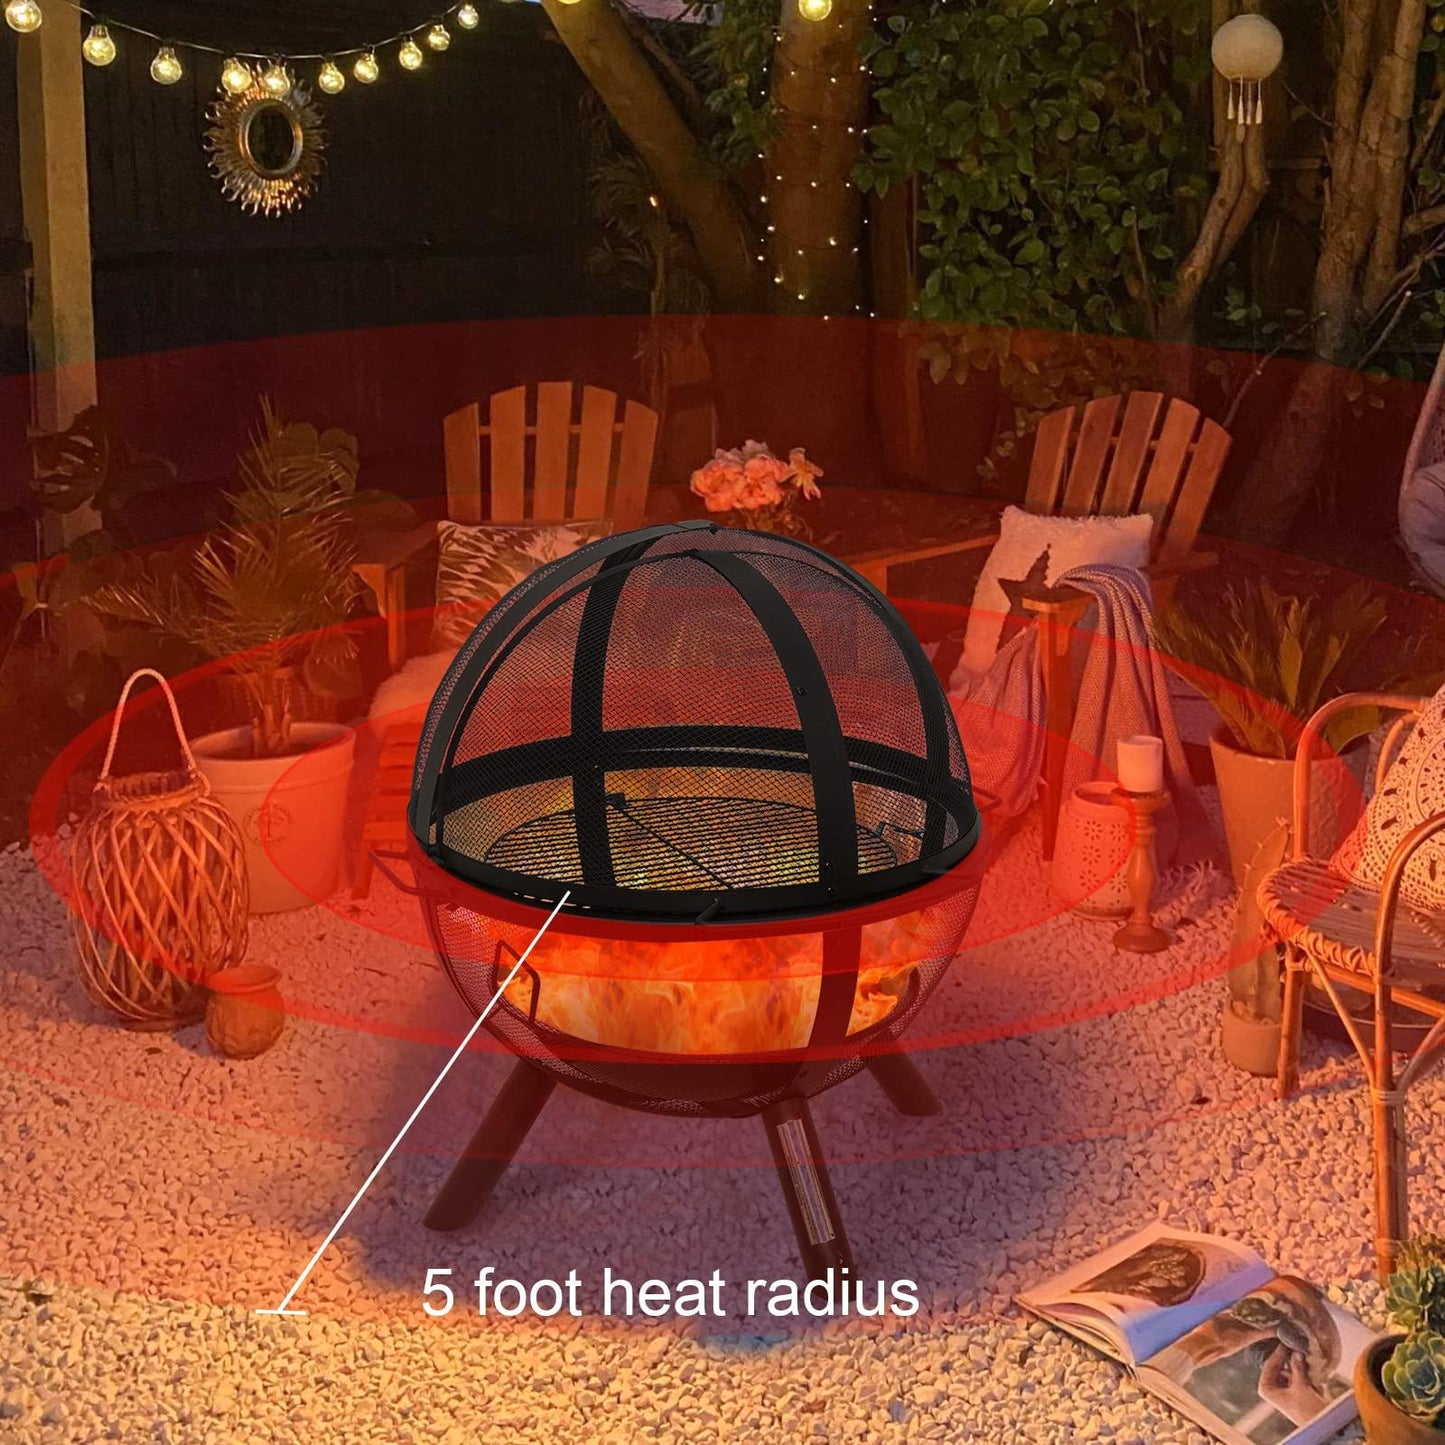 Ikuby Ball of Fire Pit 35" Outdoor fire with BBQ Grill Globe Large Round Pit,Patio Fireplace for Camping, Heating, Bonfire and Picnic - CookCave